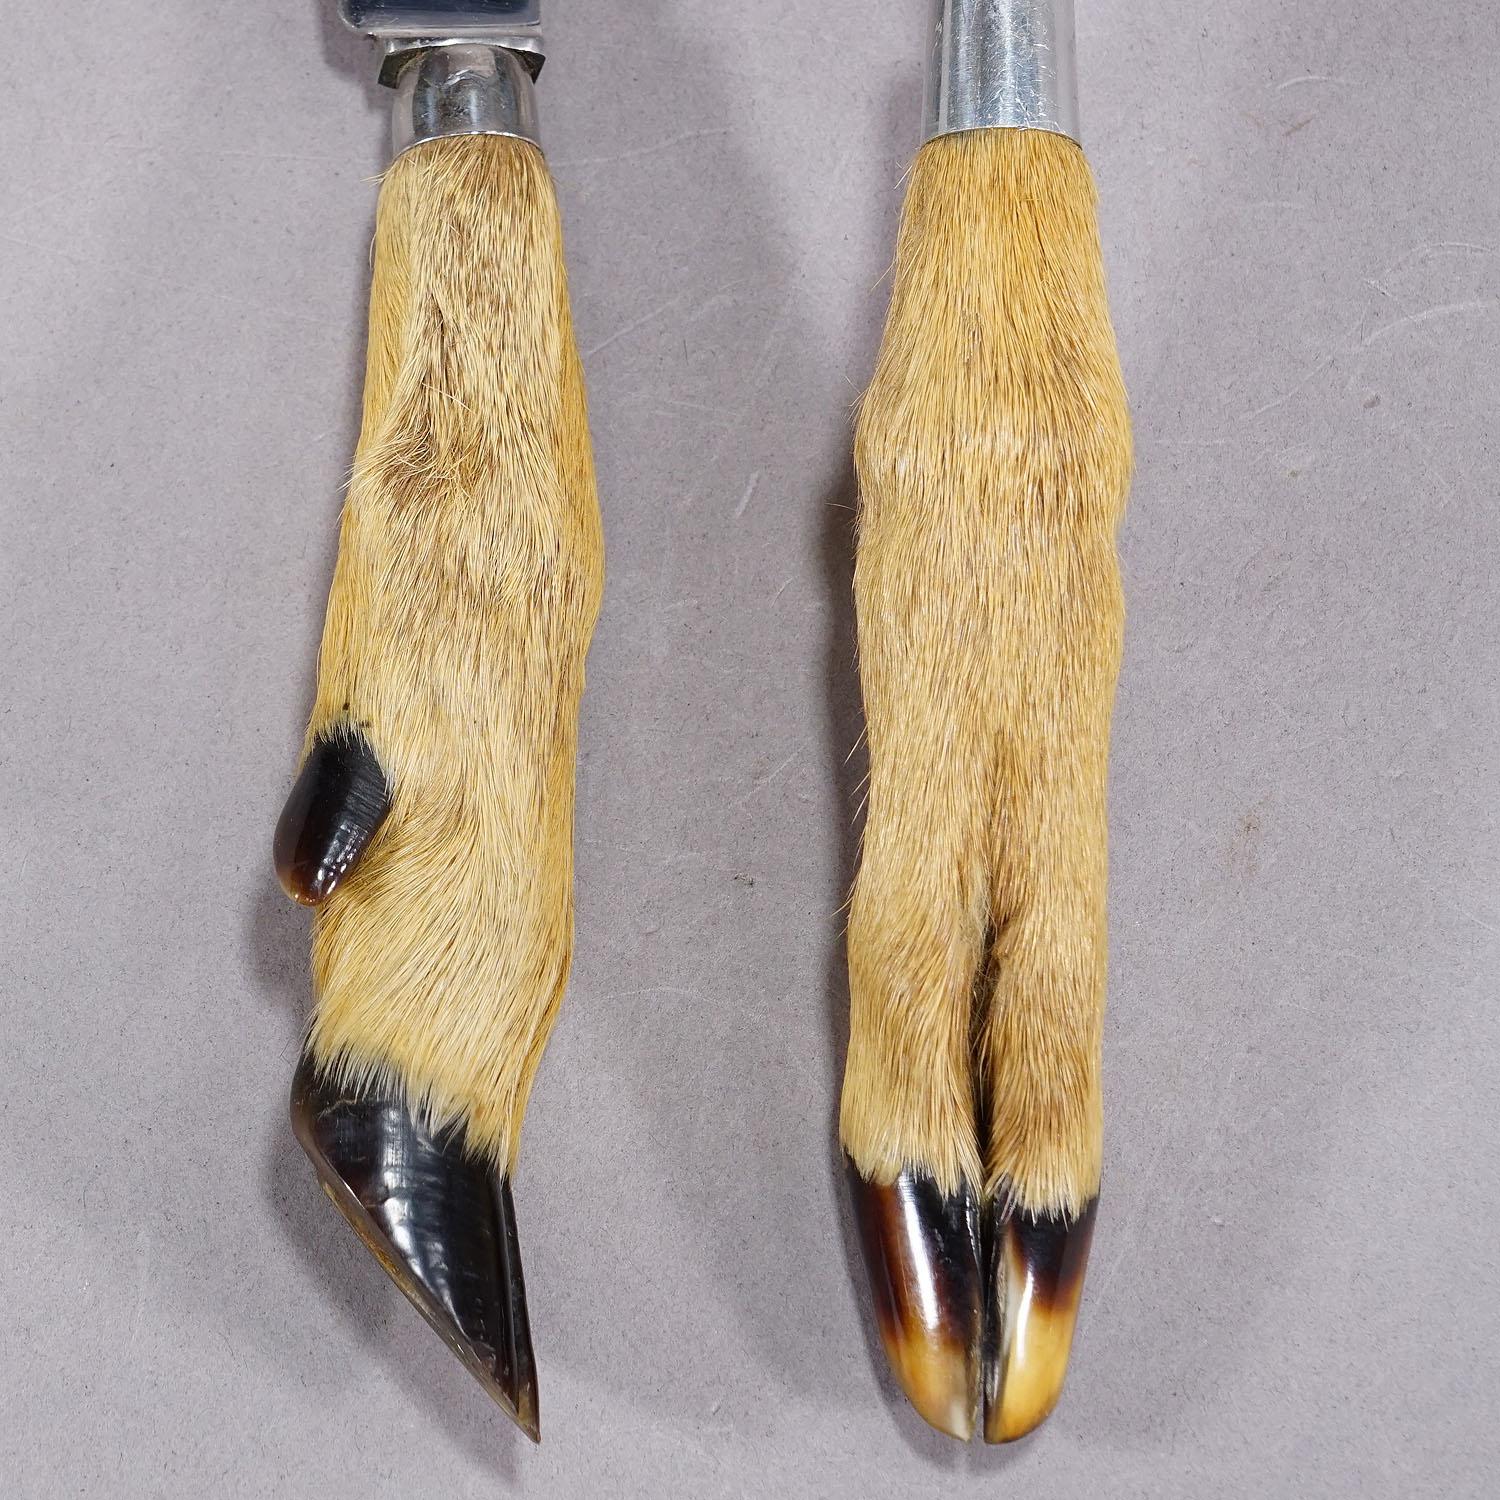 Antique Cheese and Butter Knives with Deer Handles, circa 1950s In Good Condition For Sale In Berghuelen, DE